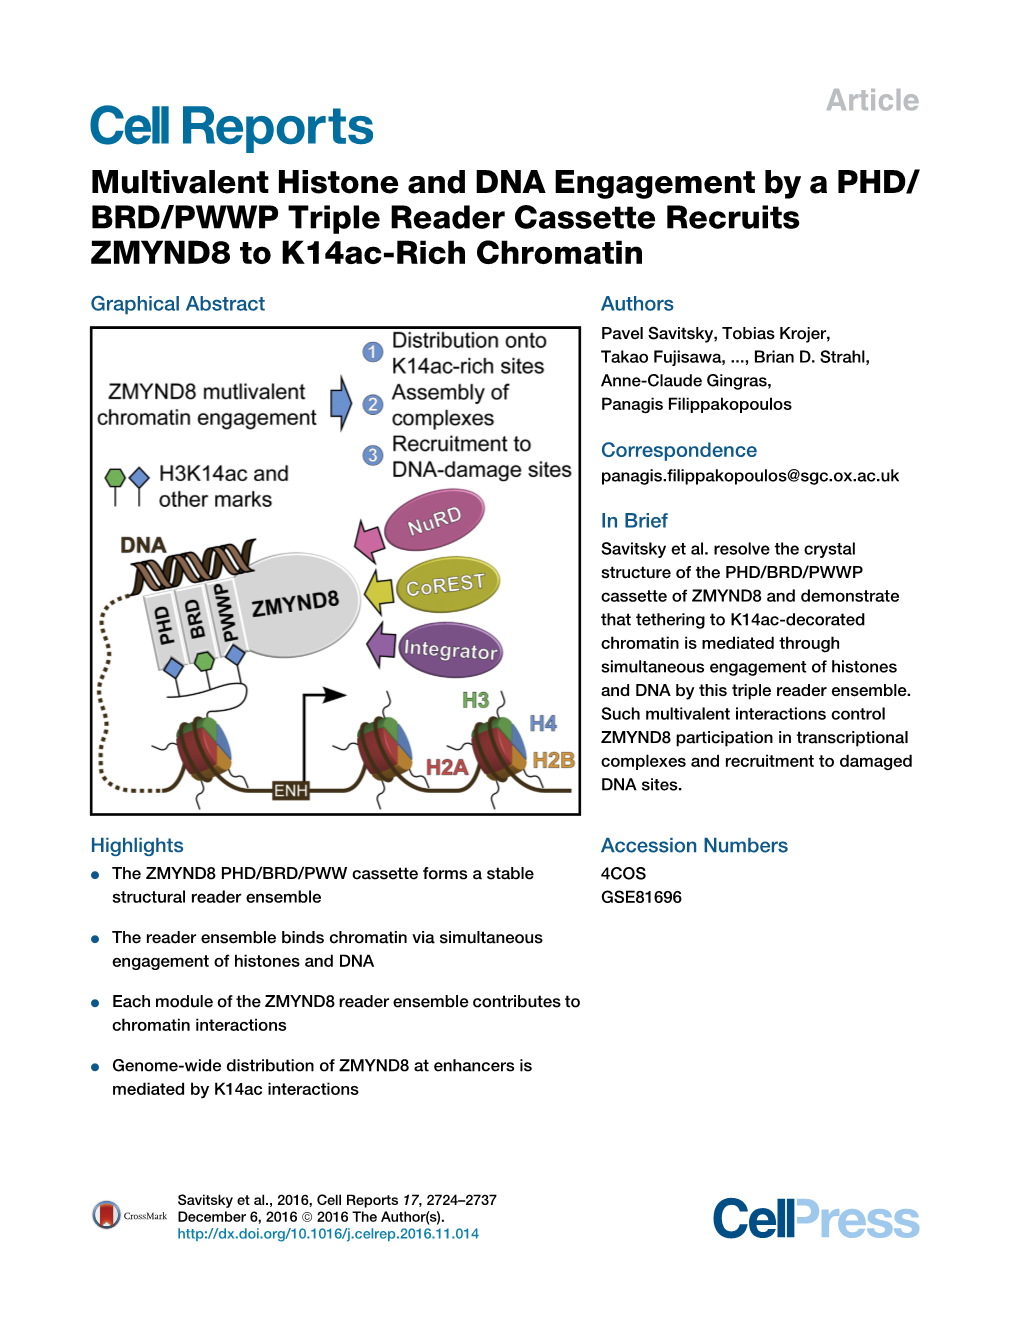 Multivalent Histone and DNA Engagement by a PHD/ BRD/PWWP Triple Reader Cassette Recruits ZMYND8 to K14ac-Rich Chromatin